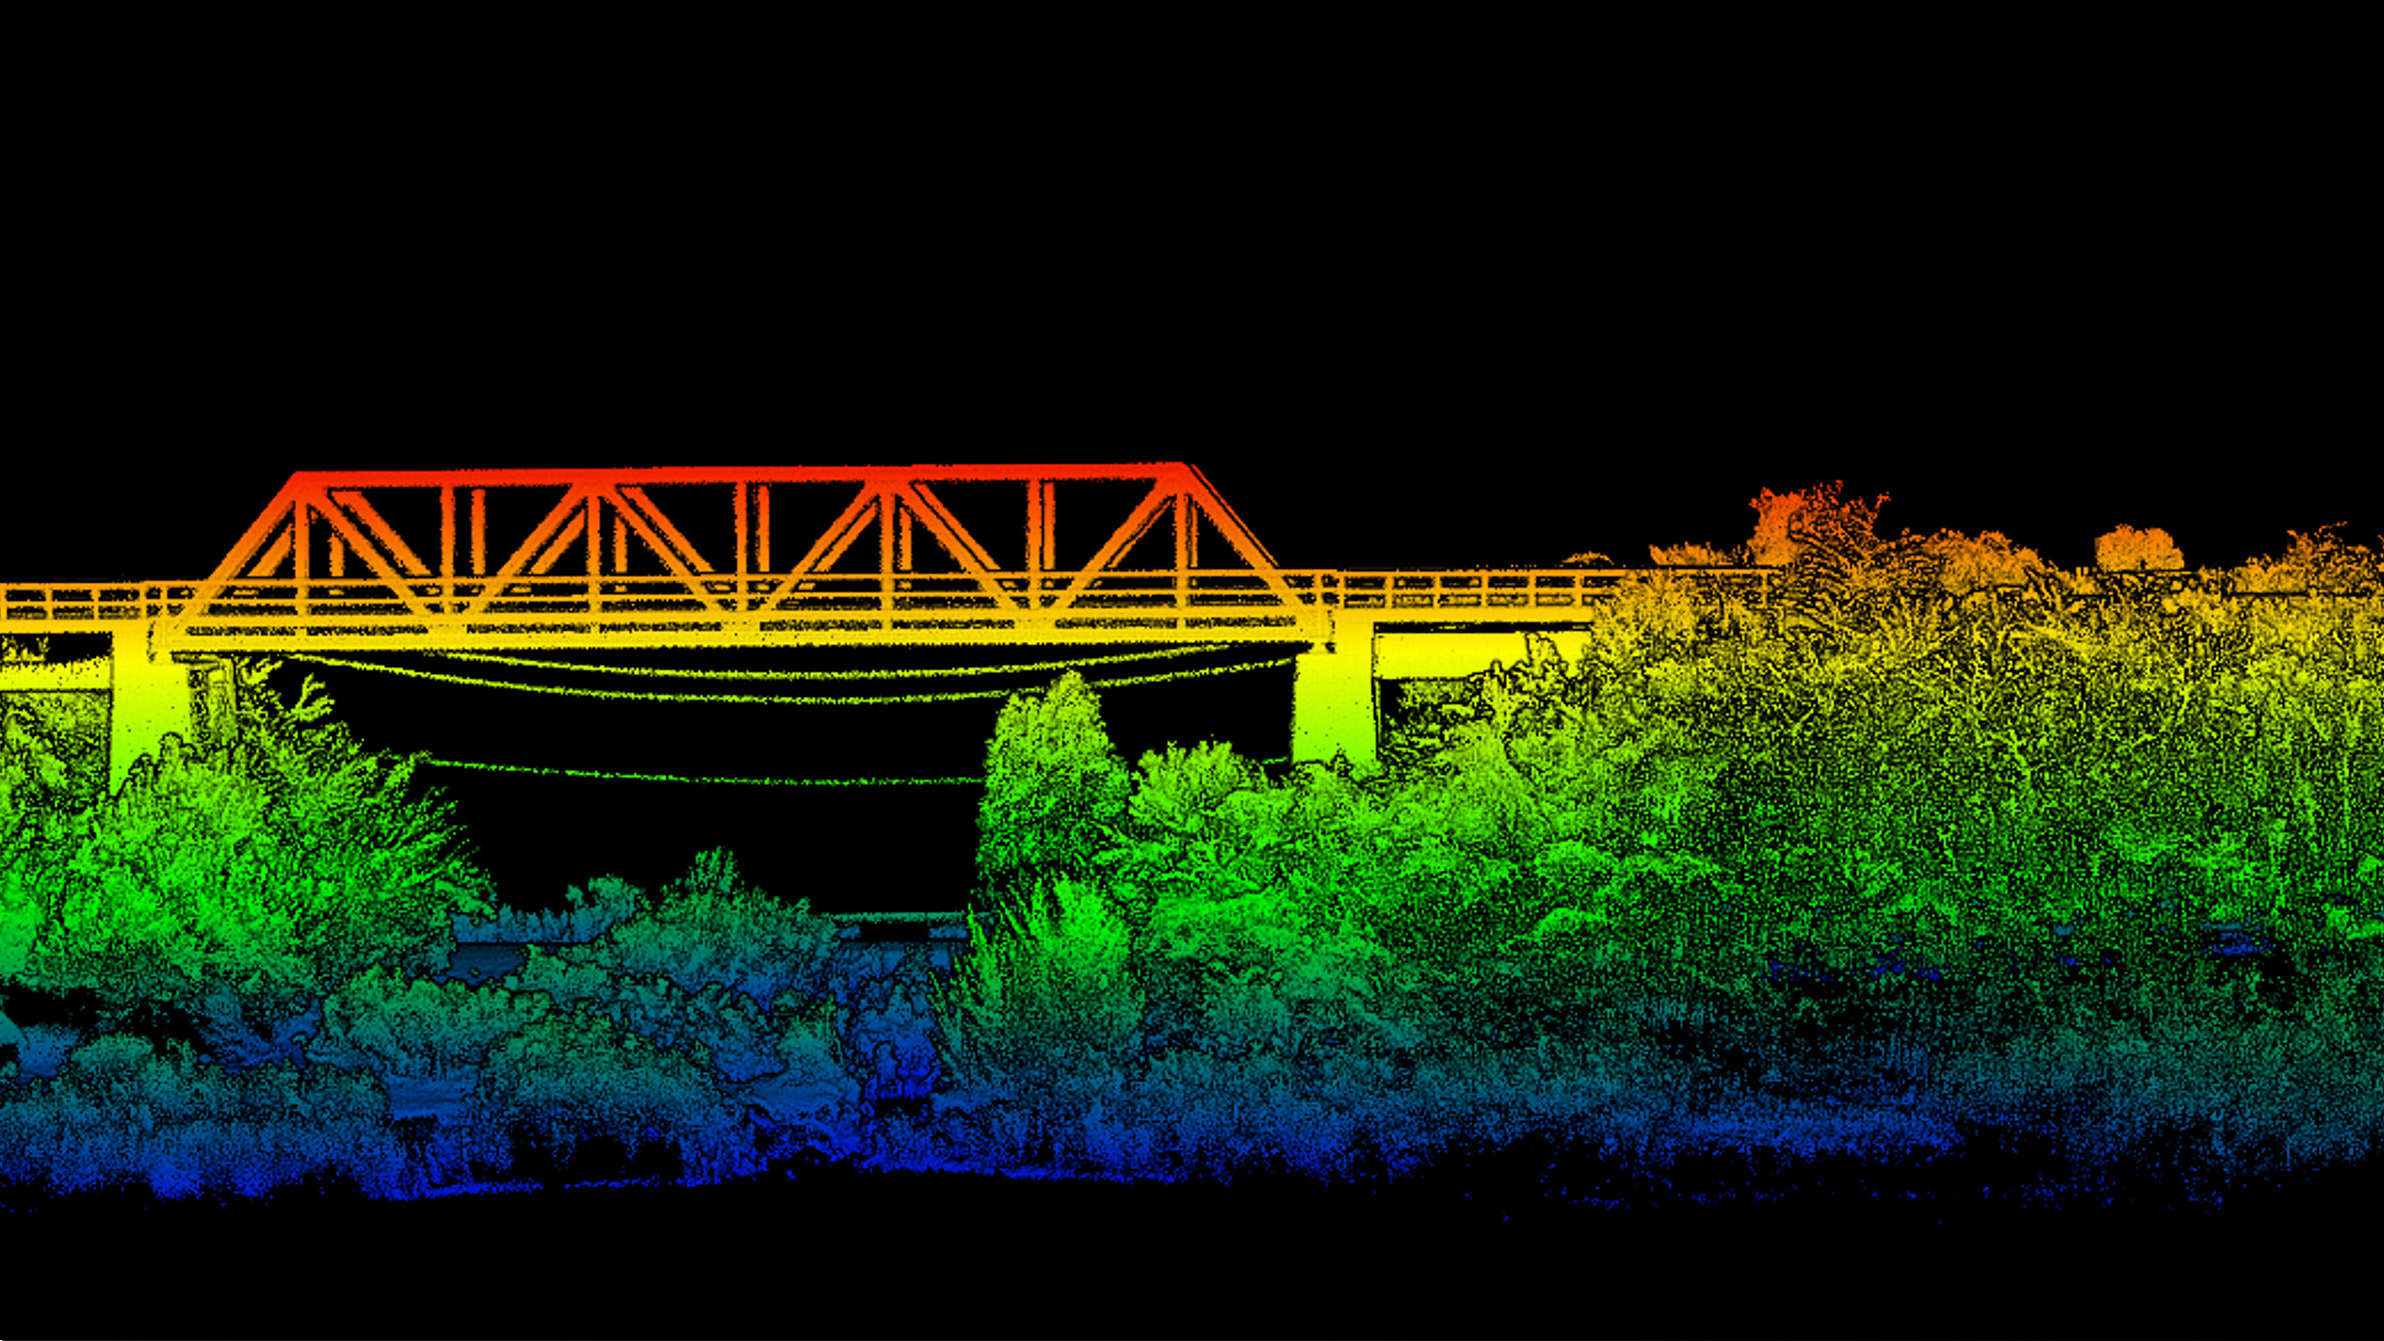 Railway Survey Completed by Dronezone SRL, an OxTS and Velodyne Lidar customer in Romania, using a UAV carrying a Velodyne Puck™ sensor with an OxTS xNAV650 INS